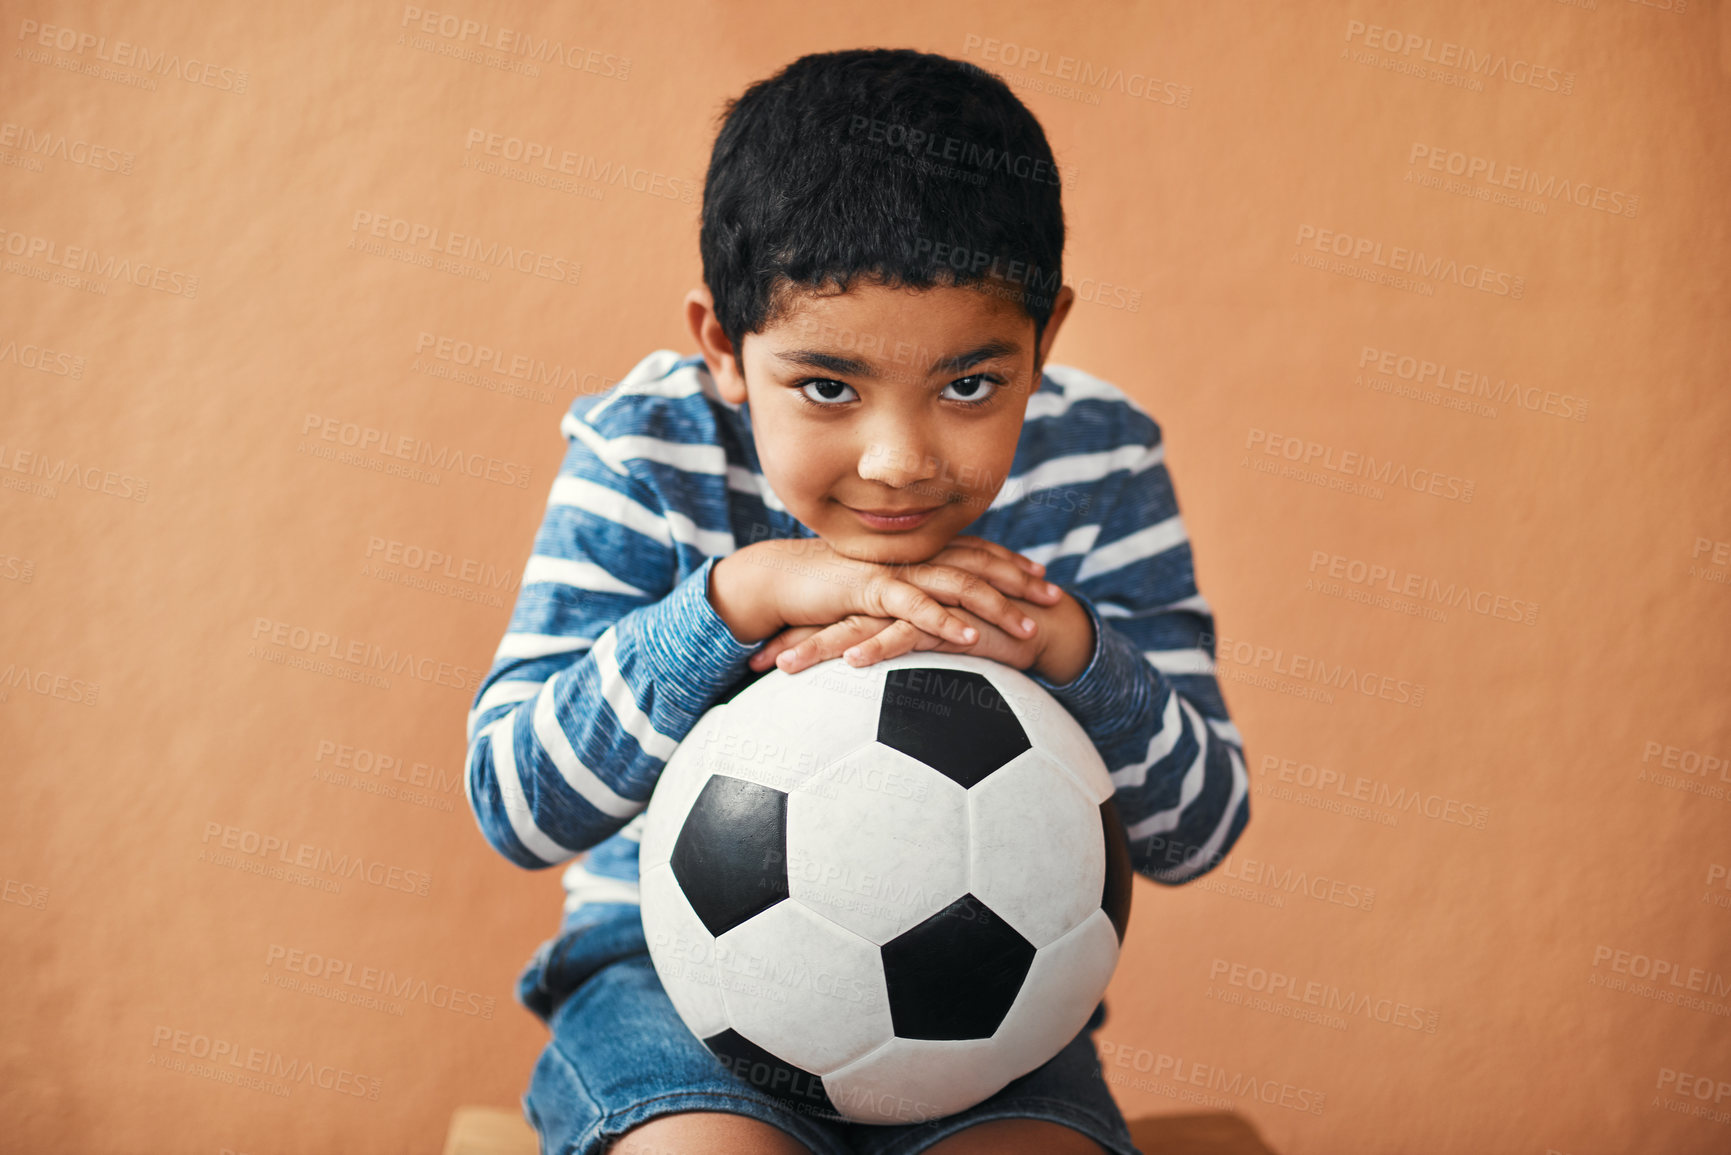 Buy stock photo Portrait of an adorable little boy posing with a soccer ball